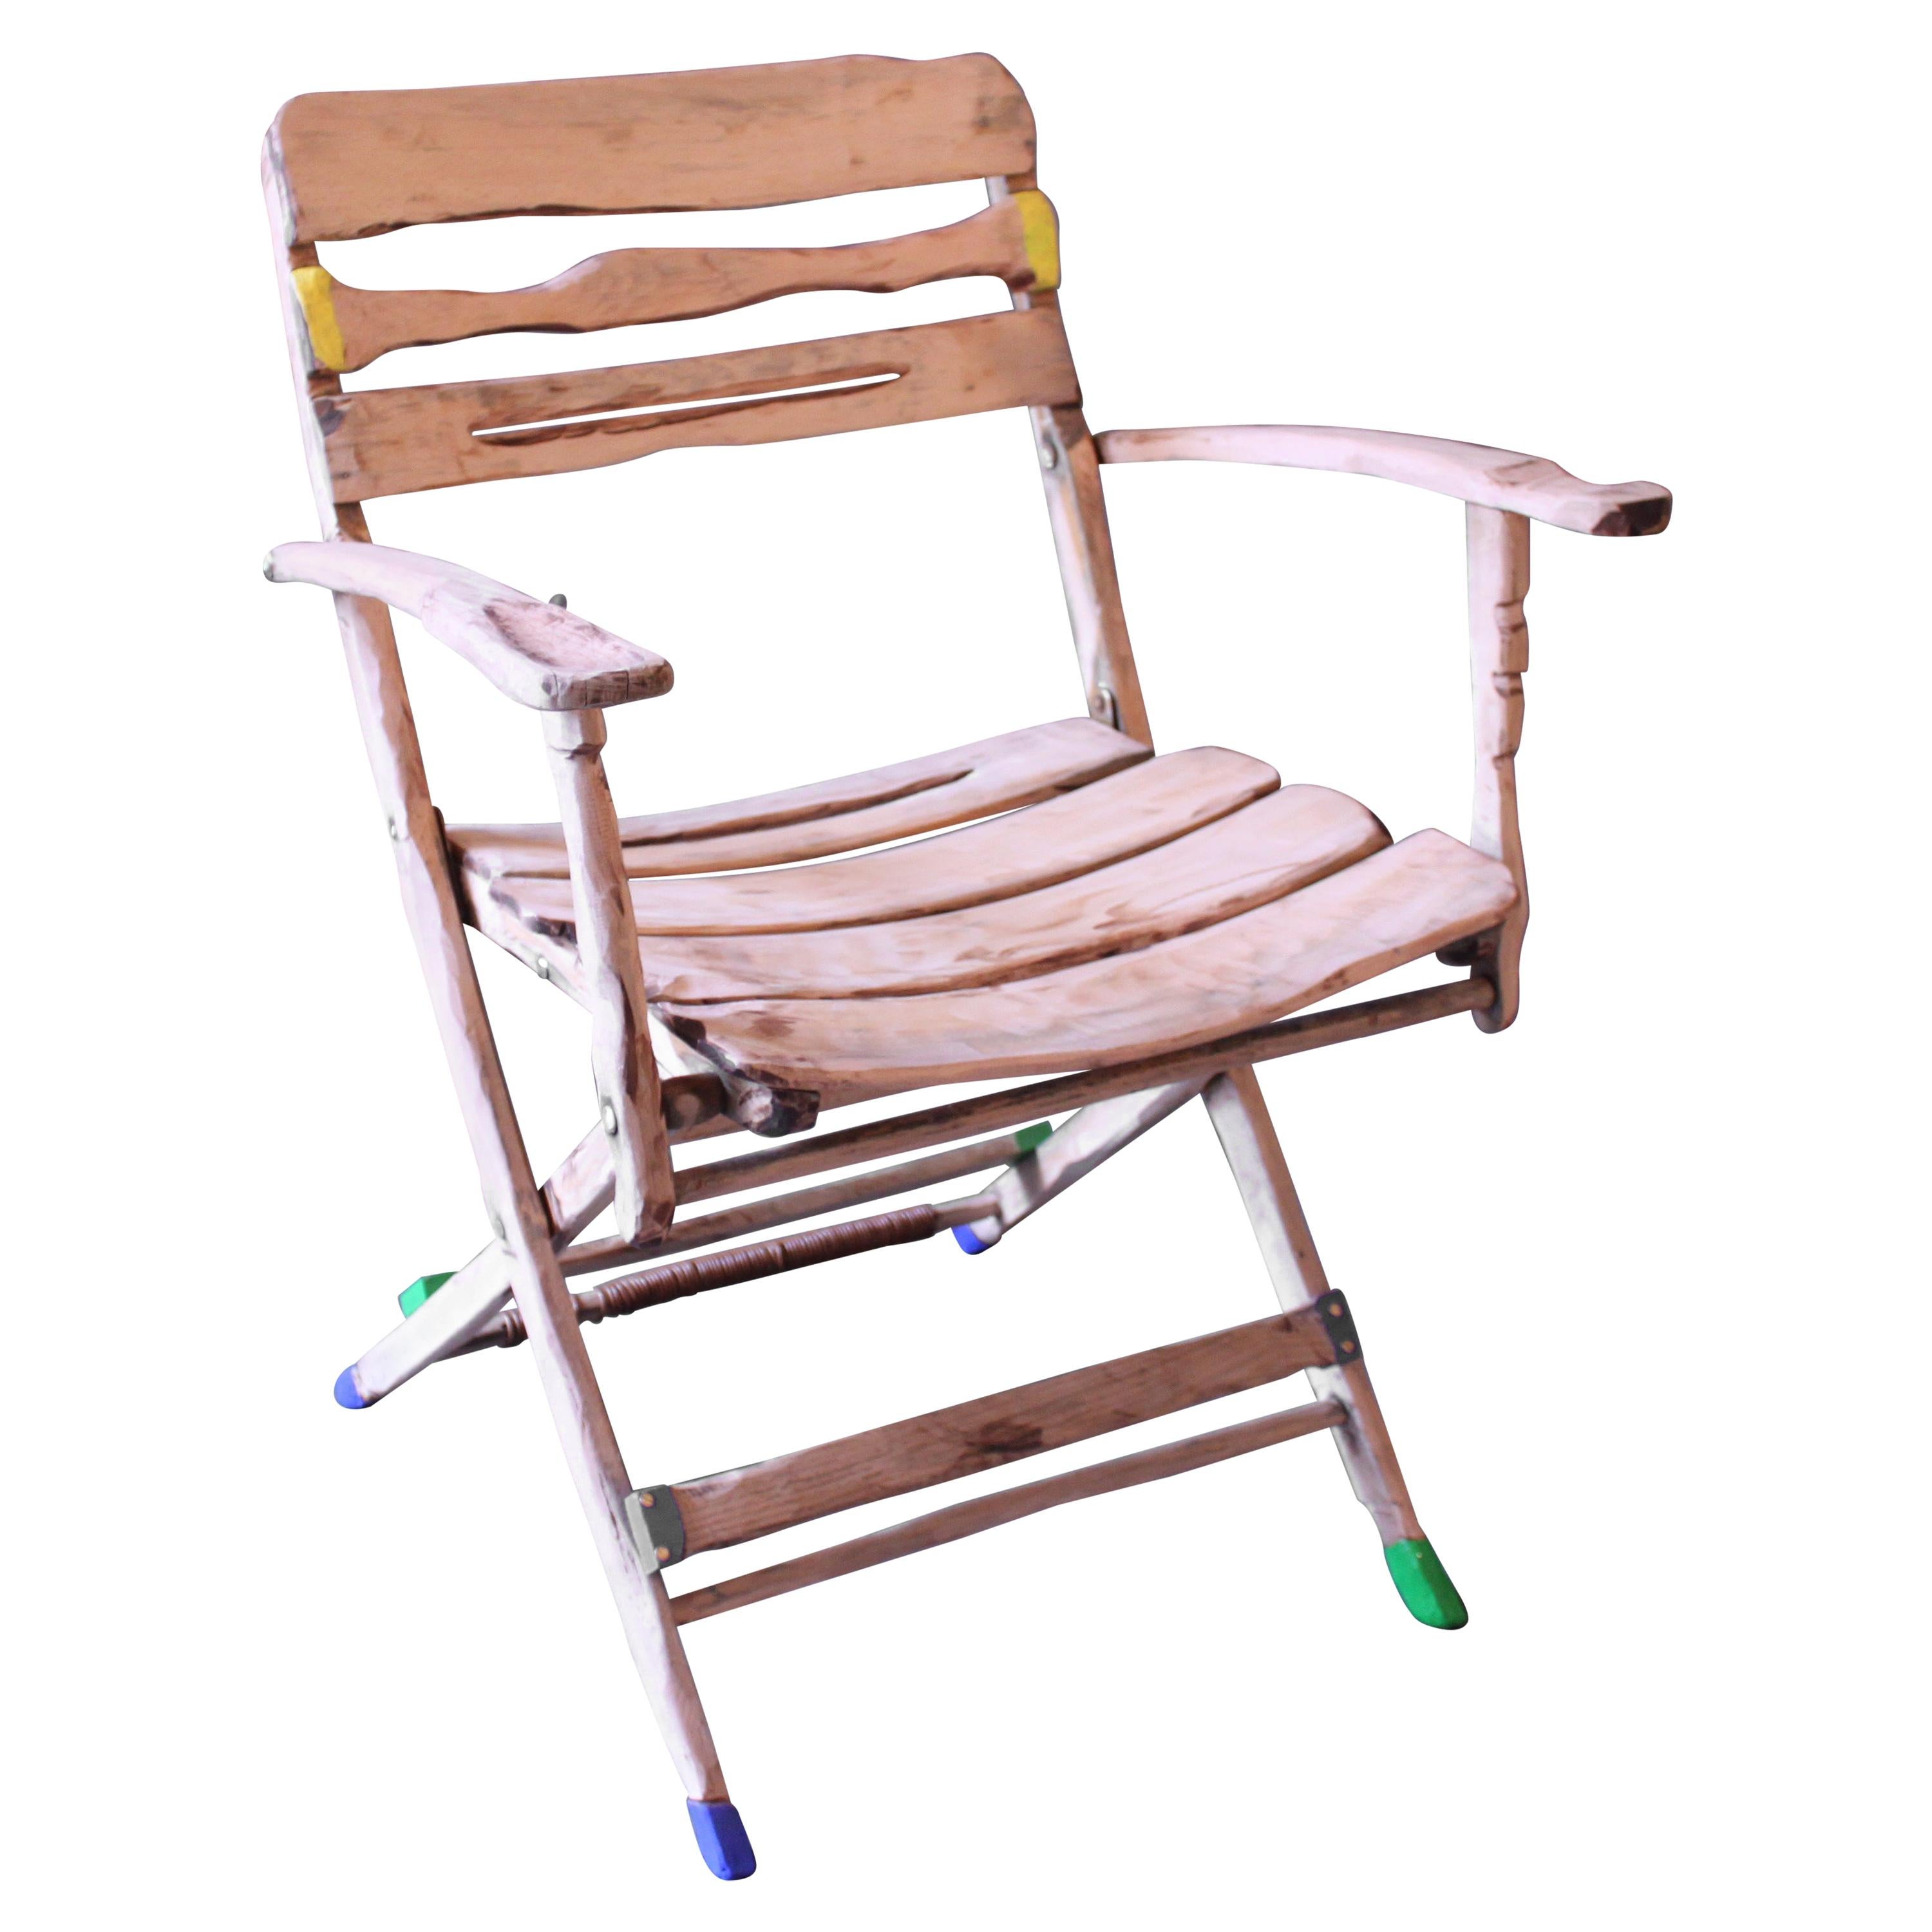 "Raw 2" Peak of a Century Chair by Markus Friedrich Staab, 2020 For Sale